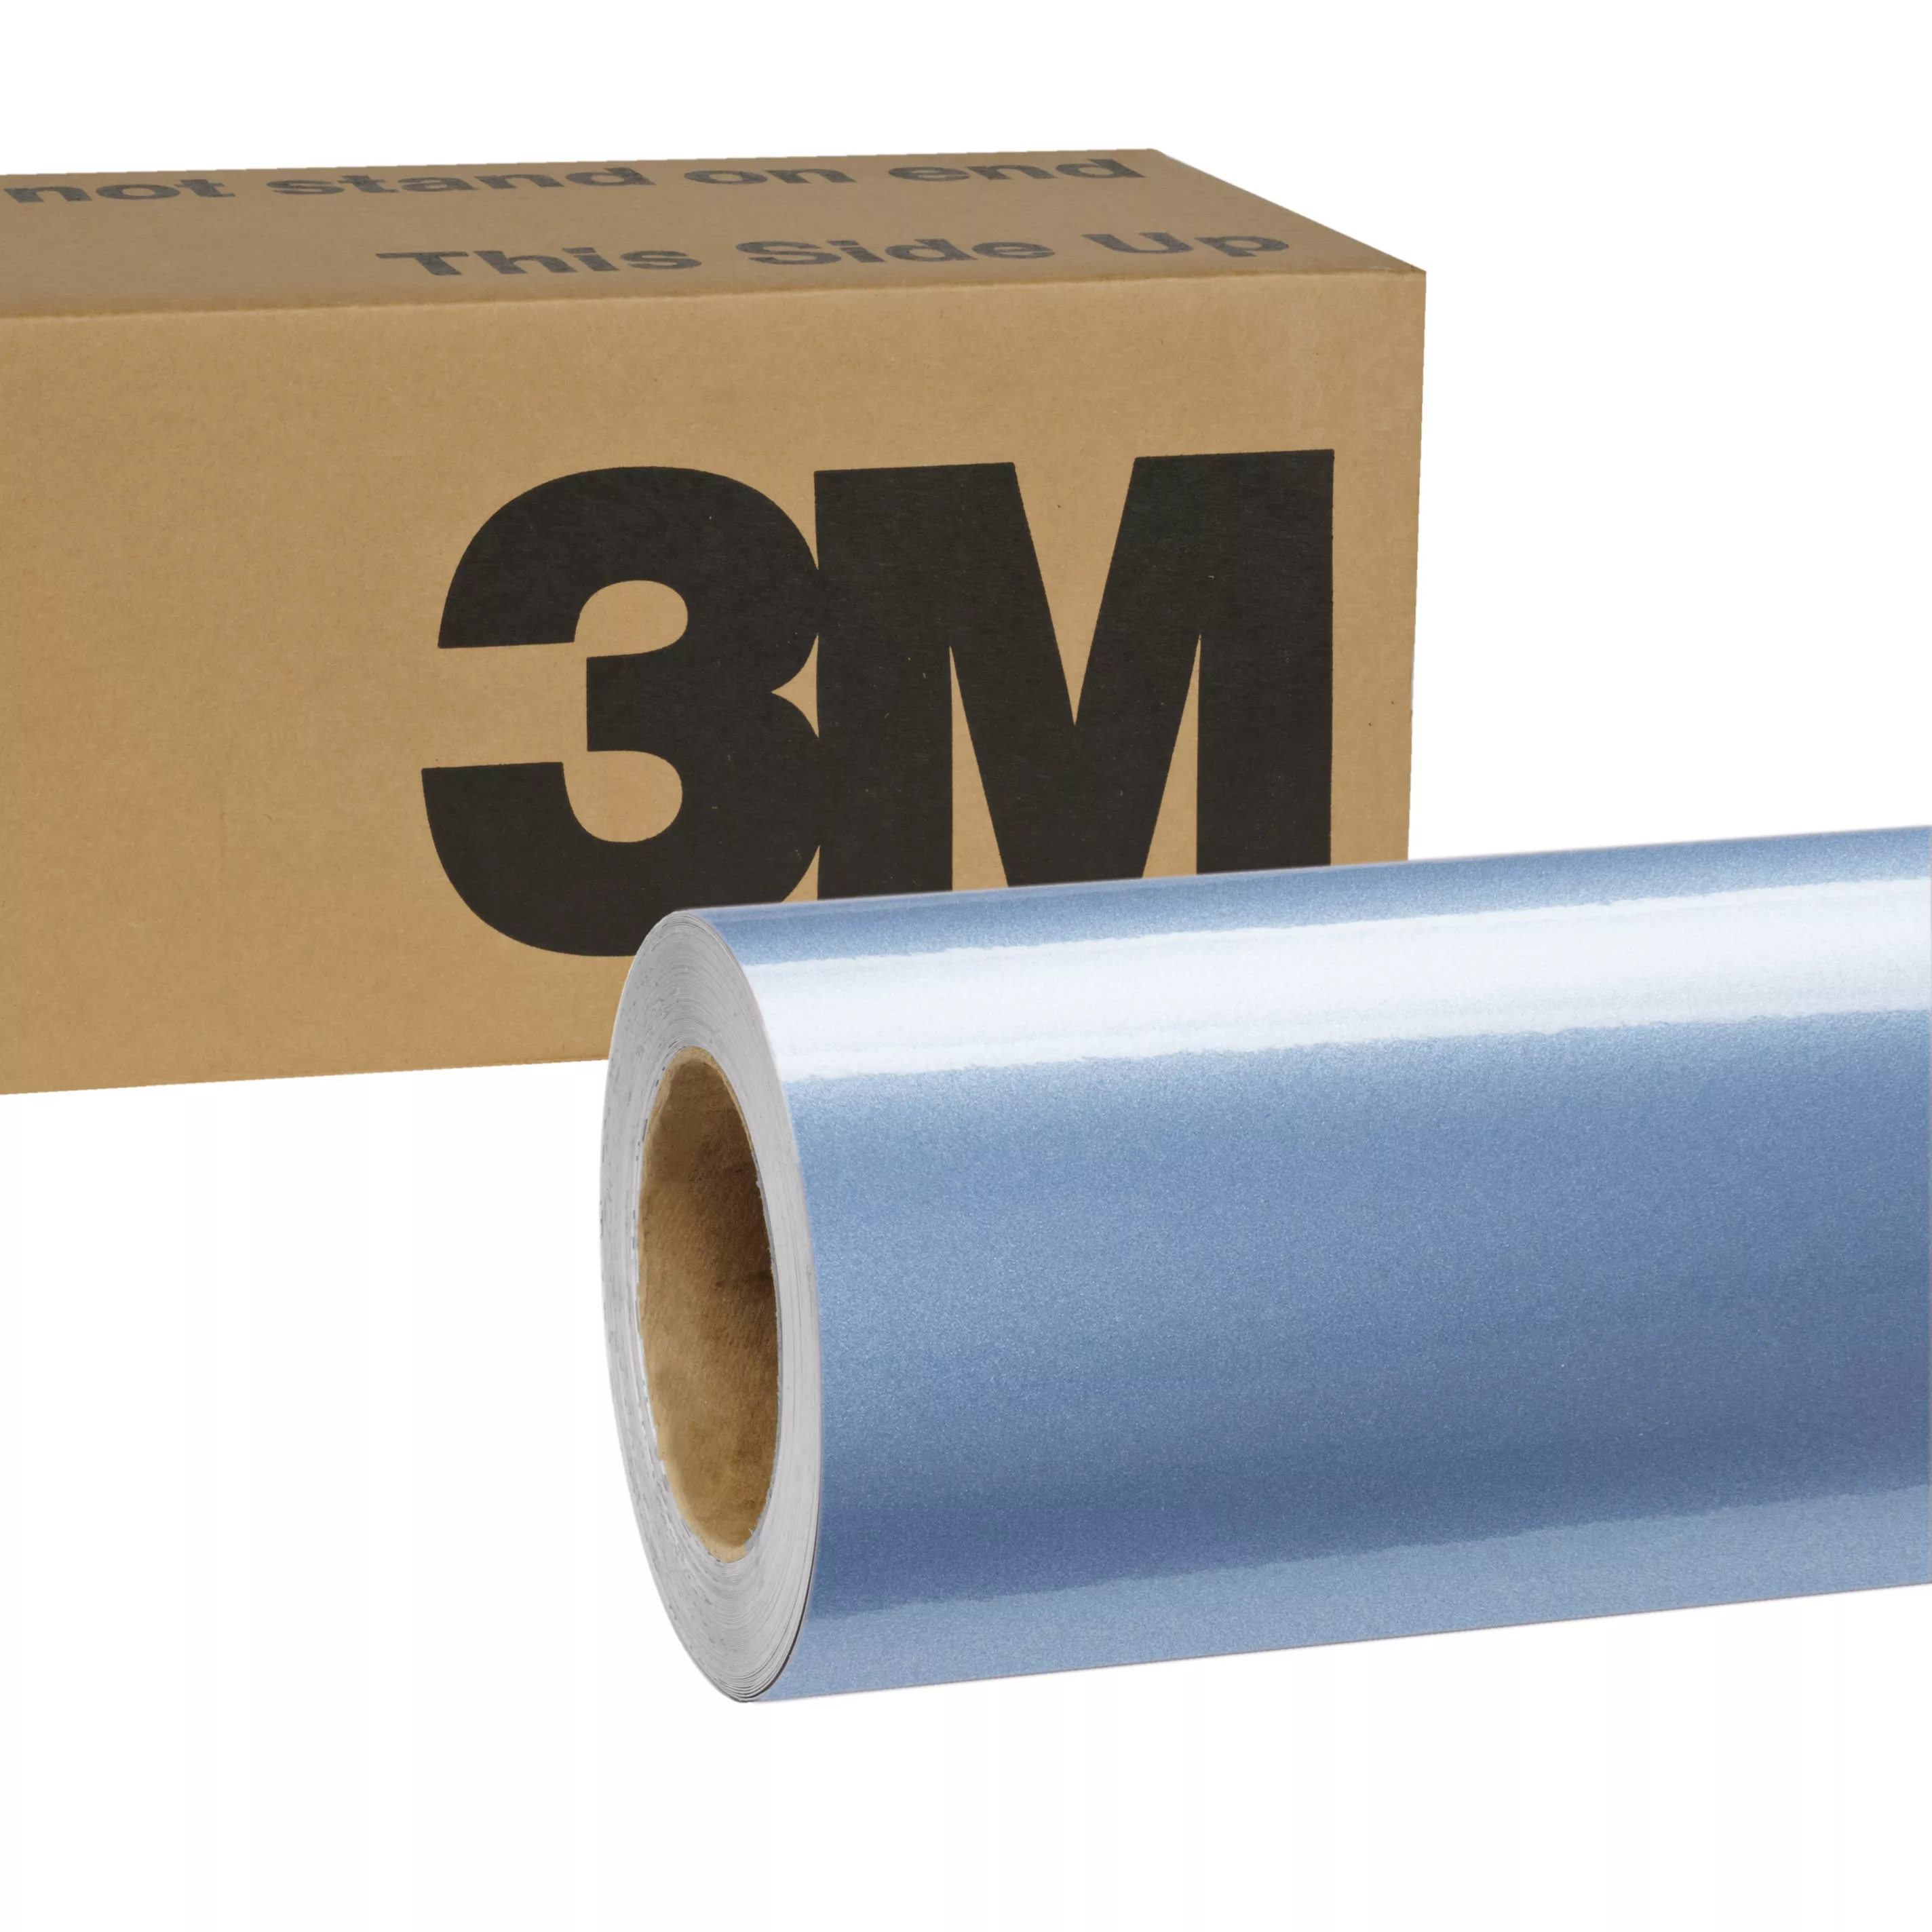 3M™ Wrap Film Series 1080-G247, Gloss Ice Blue, 60 in x 5 yd